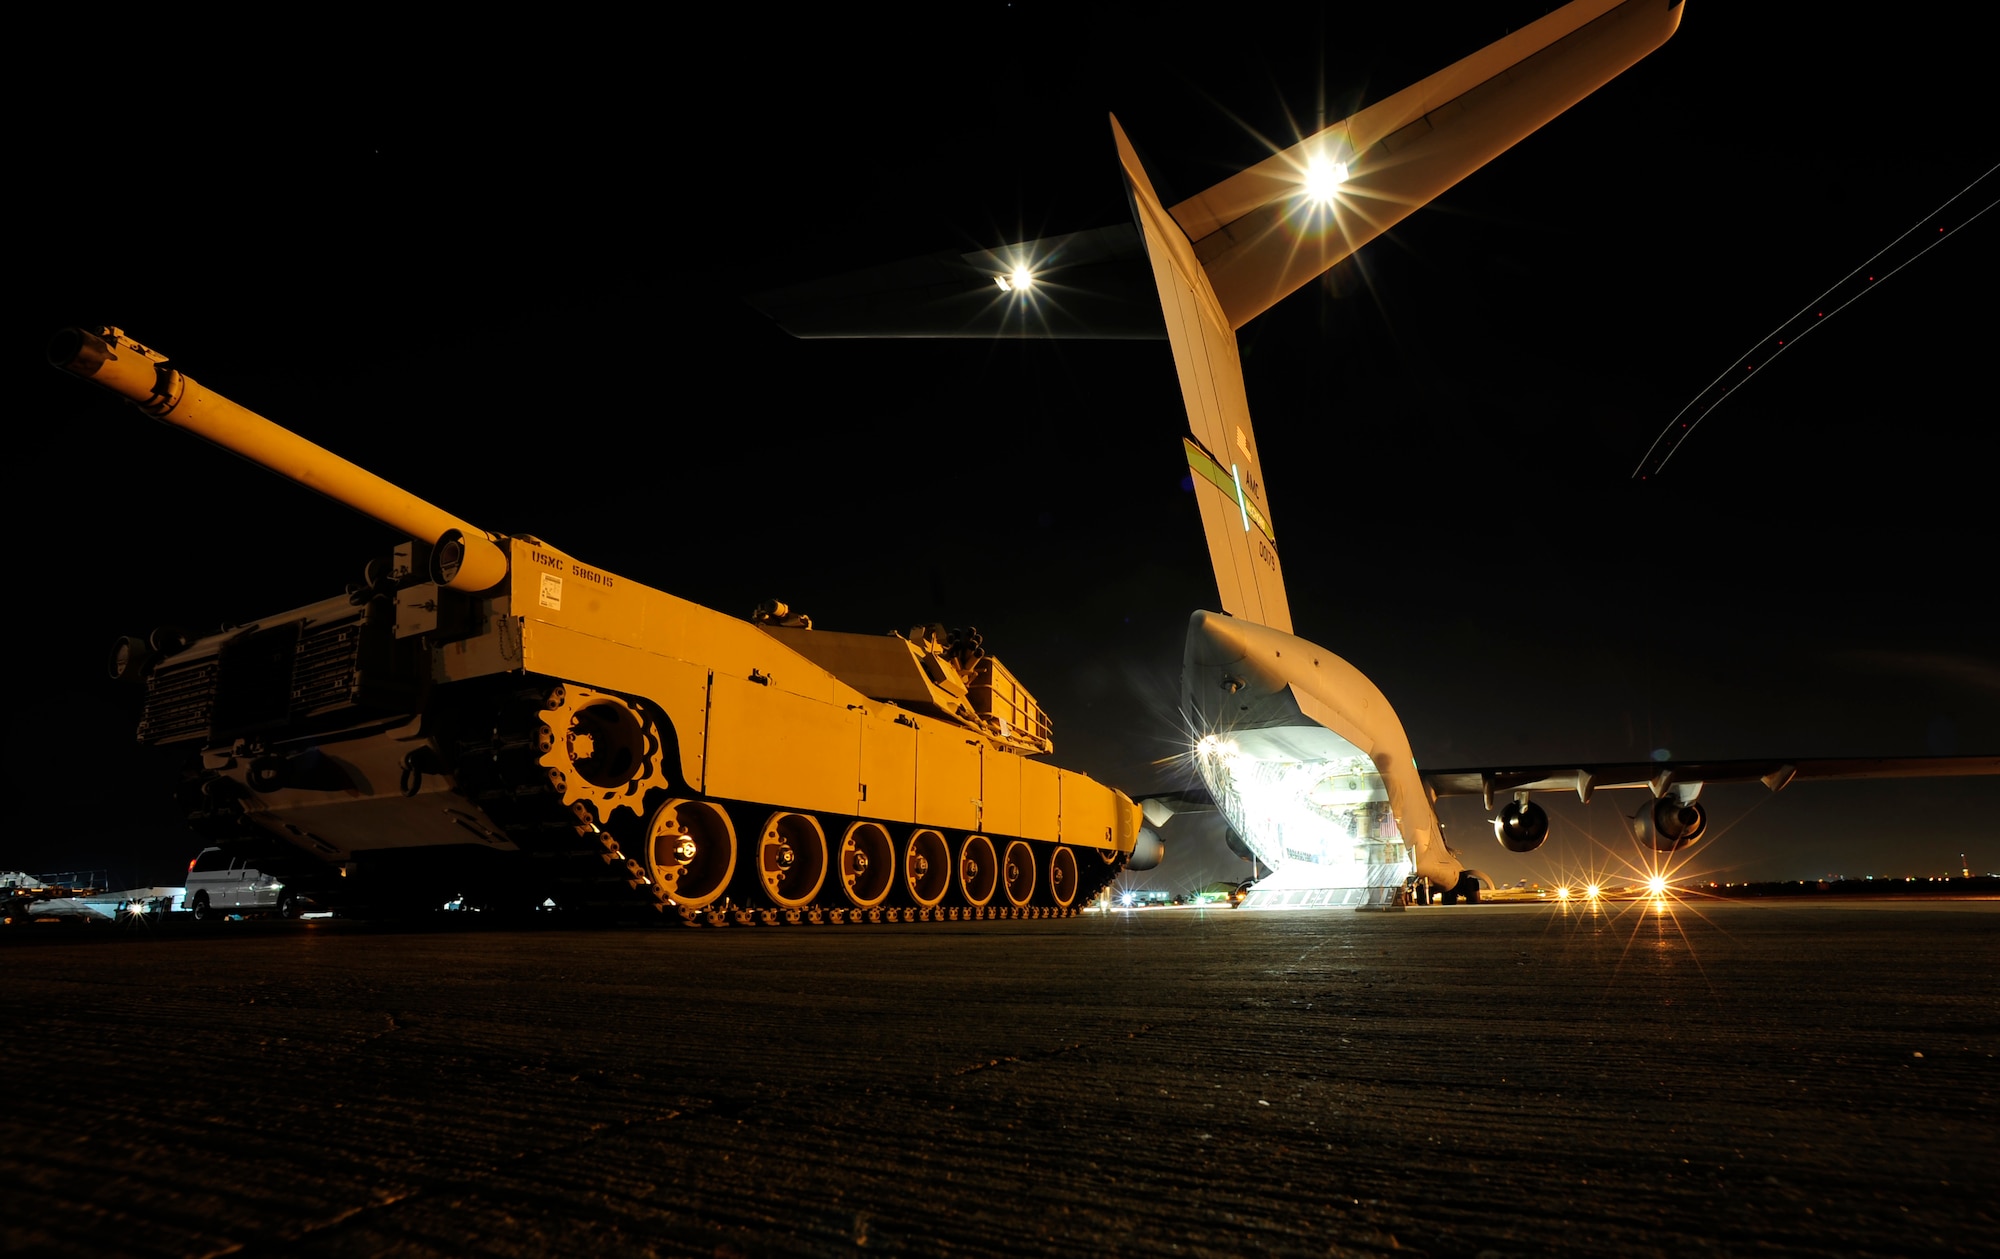 A U.S. Marine Corps M1A1 Abrams tank sits on a flightline prior to being loaded on to an Air Force C-17 Globemaster III aircraft assigned to the 816th Expeditionary Airlift Squadron (EAS) en route to Afghanistan in support of Operation Enduring Freedom on Nov. 28, 2010. The 816th EAS is an airlift unit assigned to an undisclosed location in Southwest Asia. (U.S. Air Force Photo/Staff Sgt. Andy M. Kin)